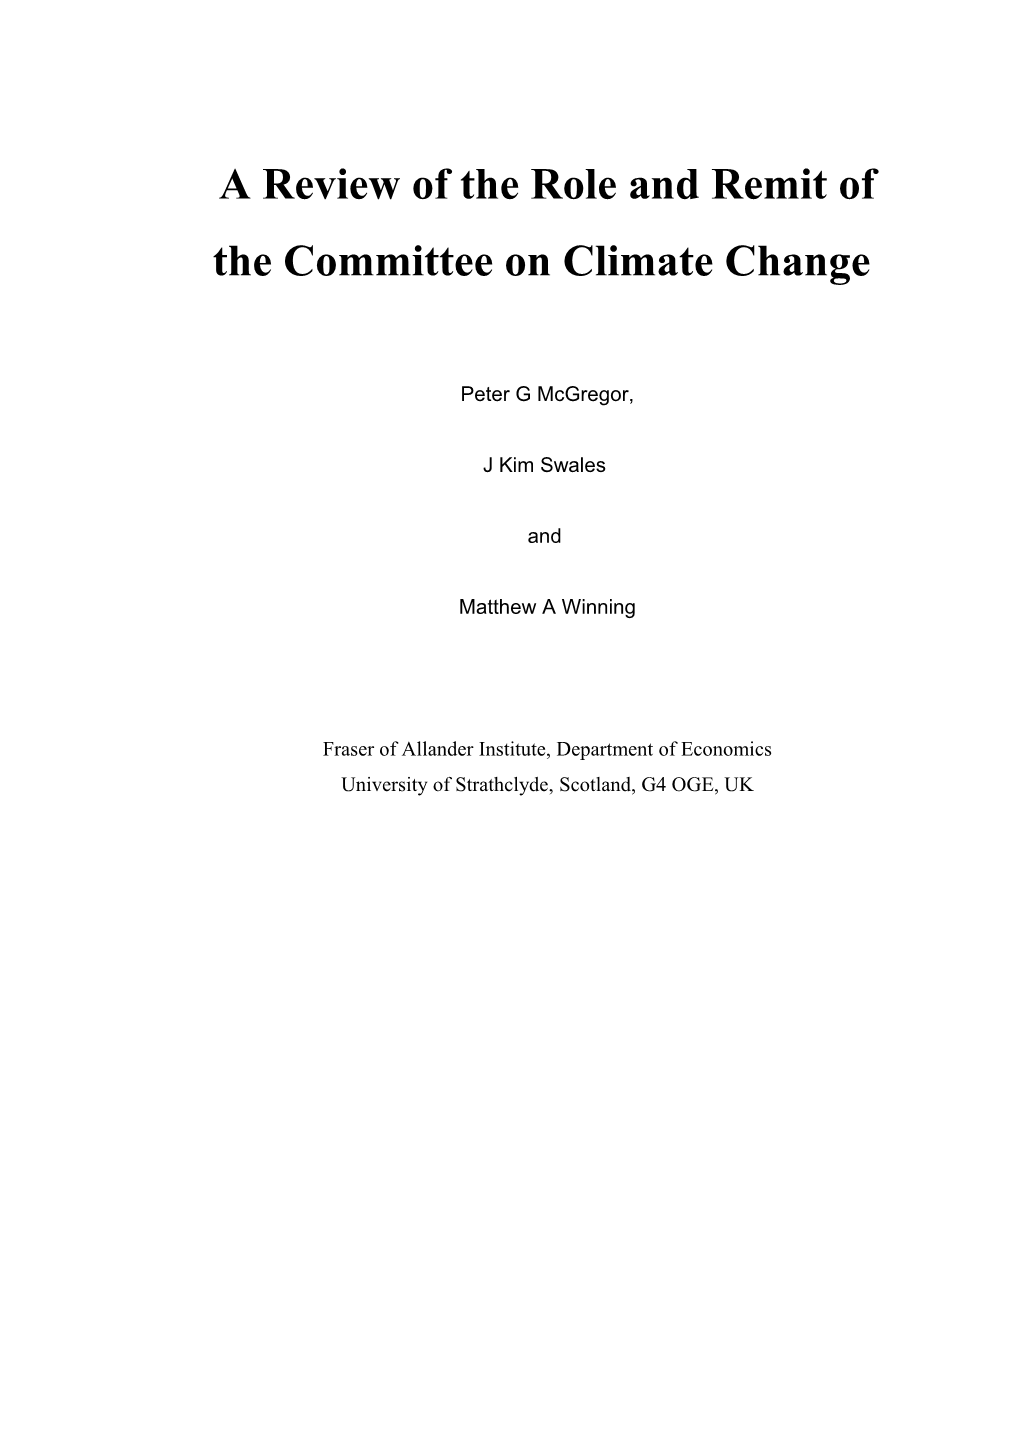 The Climate Change Committee